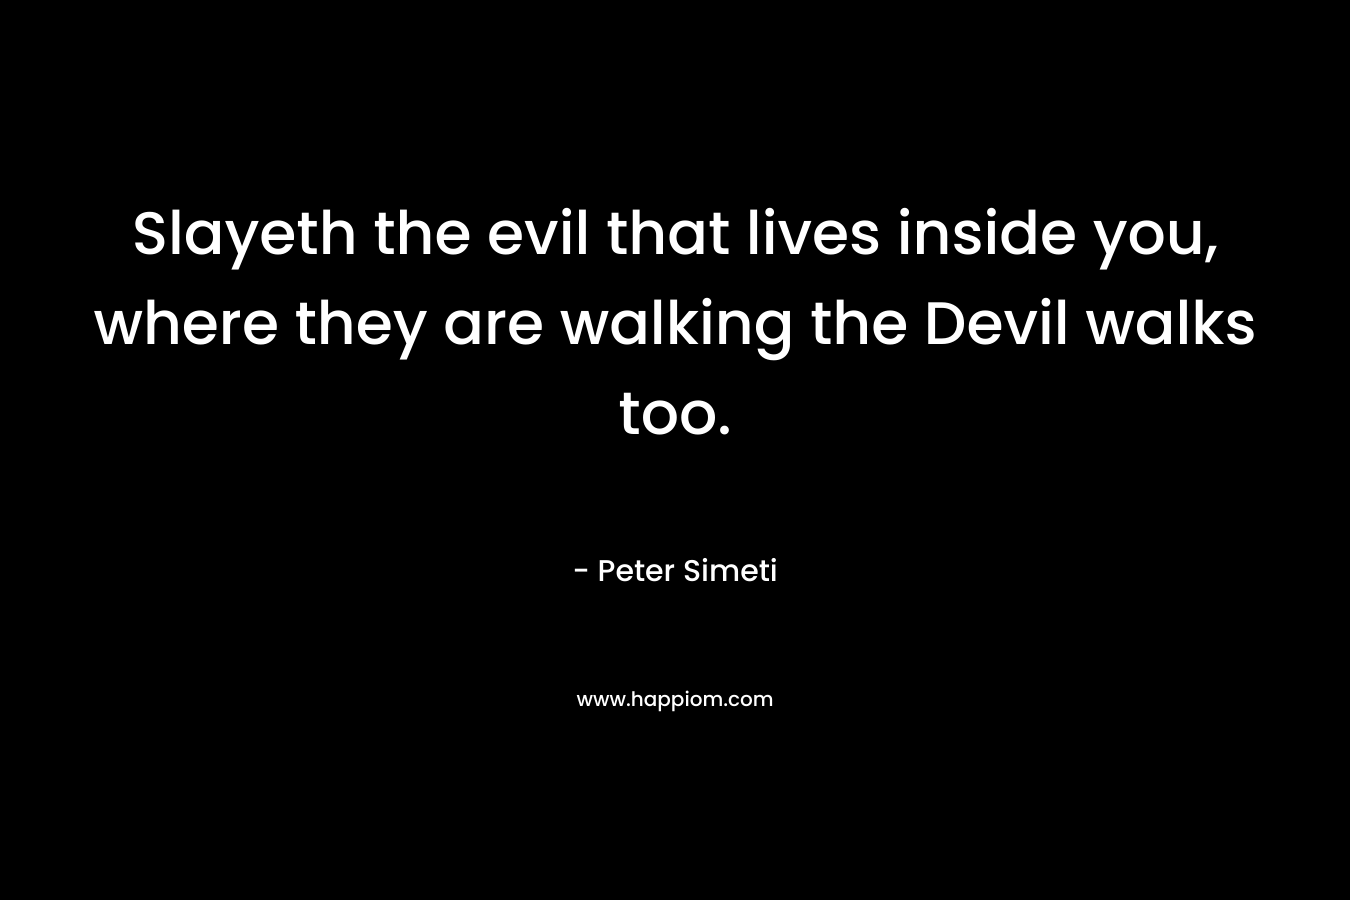 Slayeth the evil that lives inside you, where they are walking the Devil walks too.